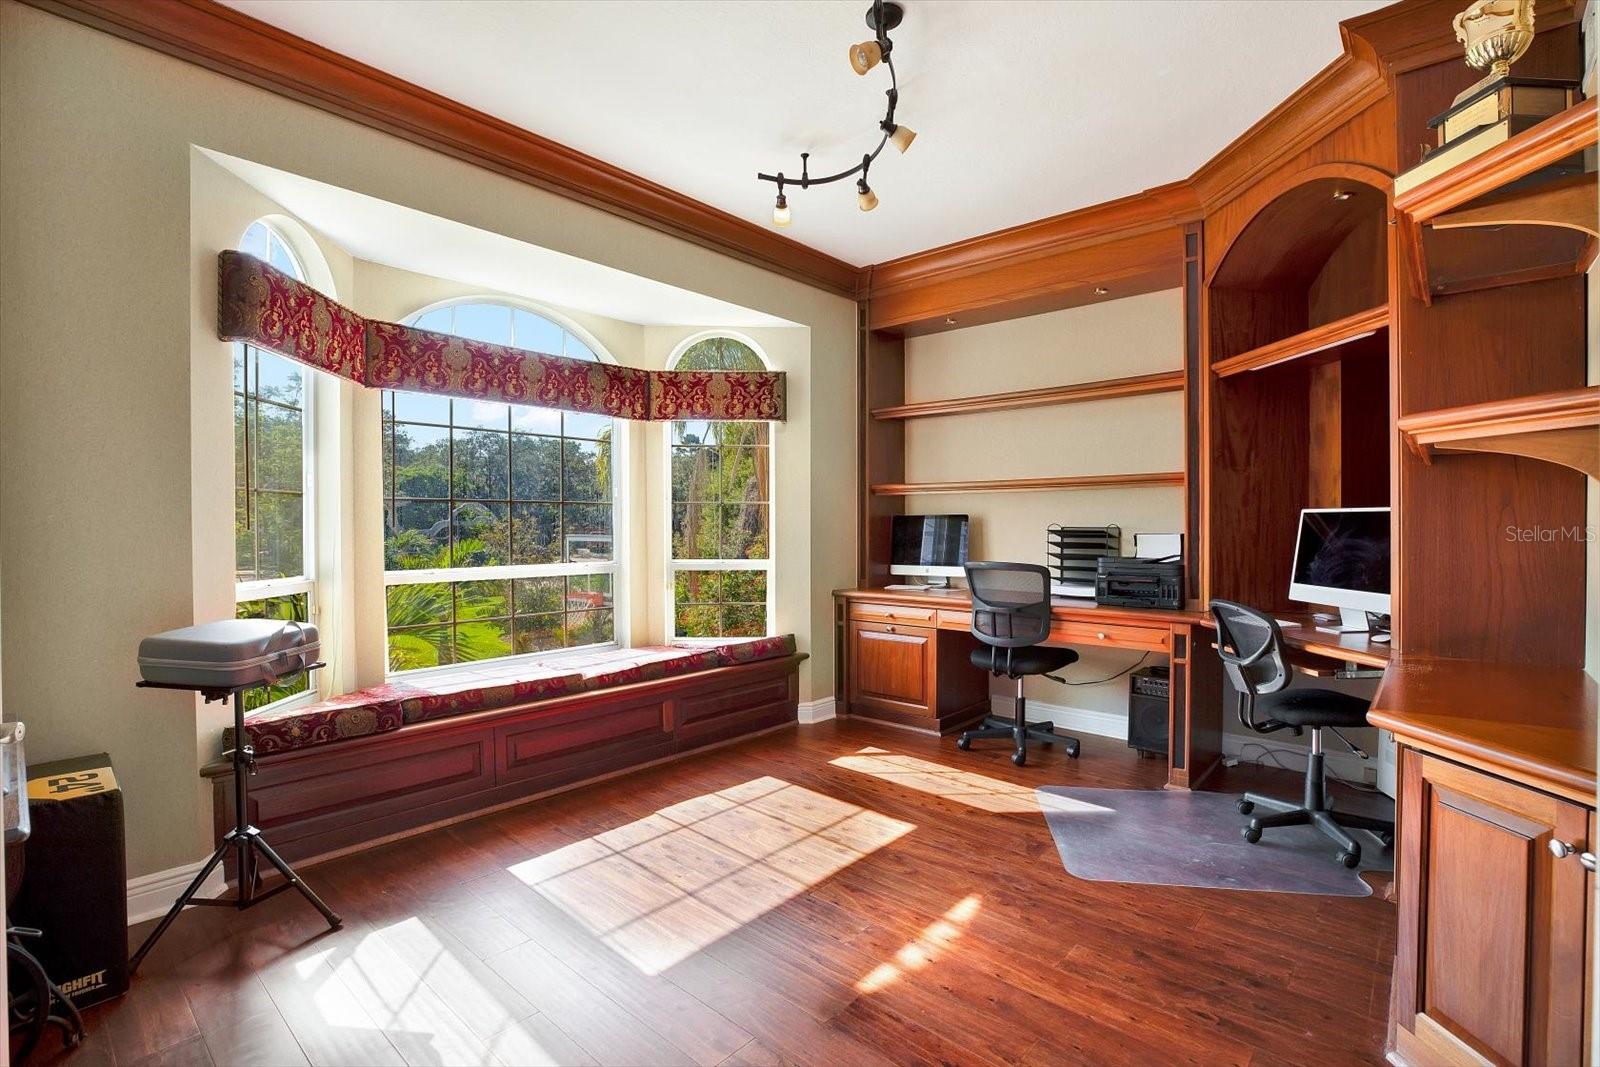 An tasteful office clad in gorgeous wooden built-ins is located right off the formal living room and offers the perfect place to work from home, or a spot in the sun to read your favorite book